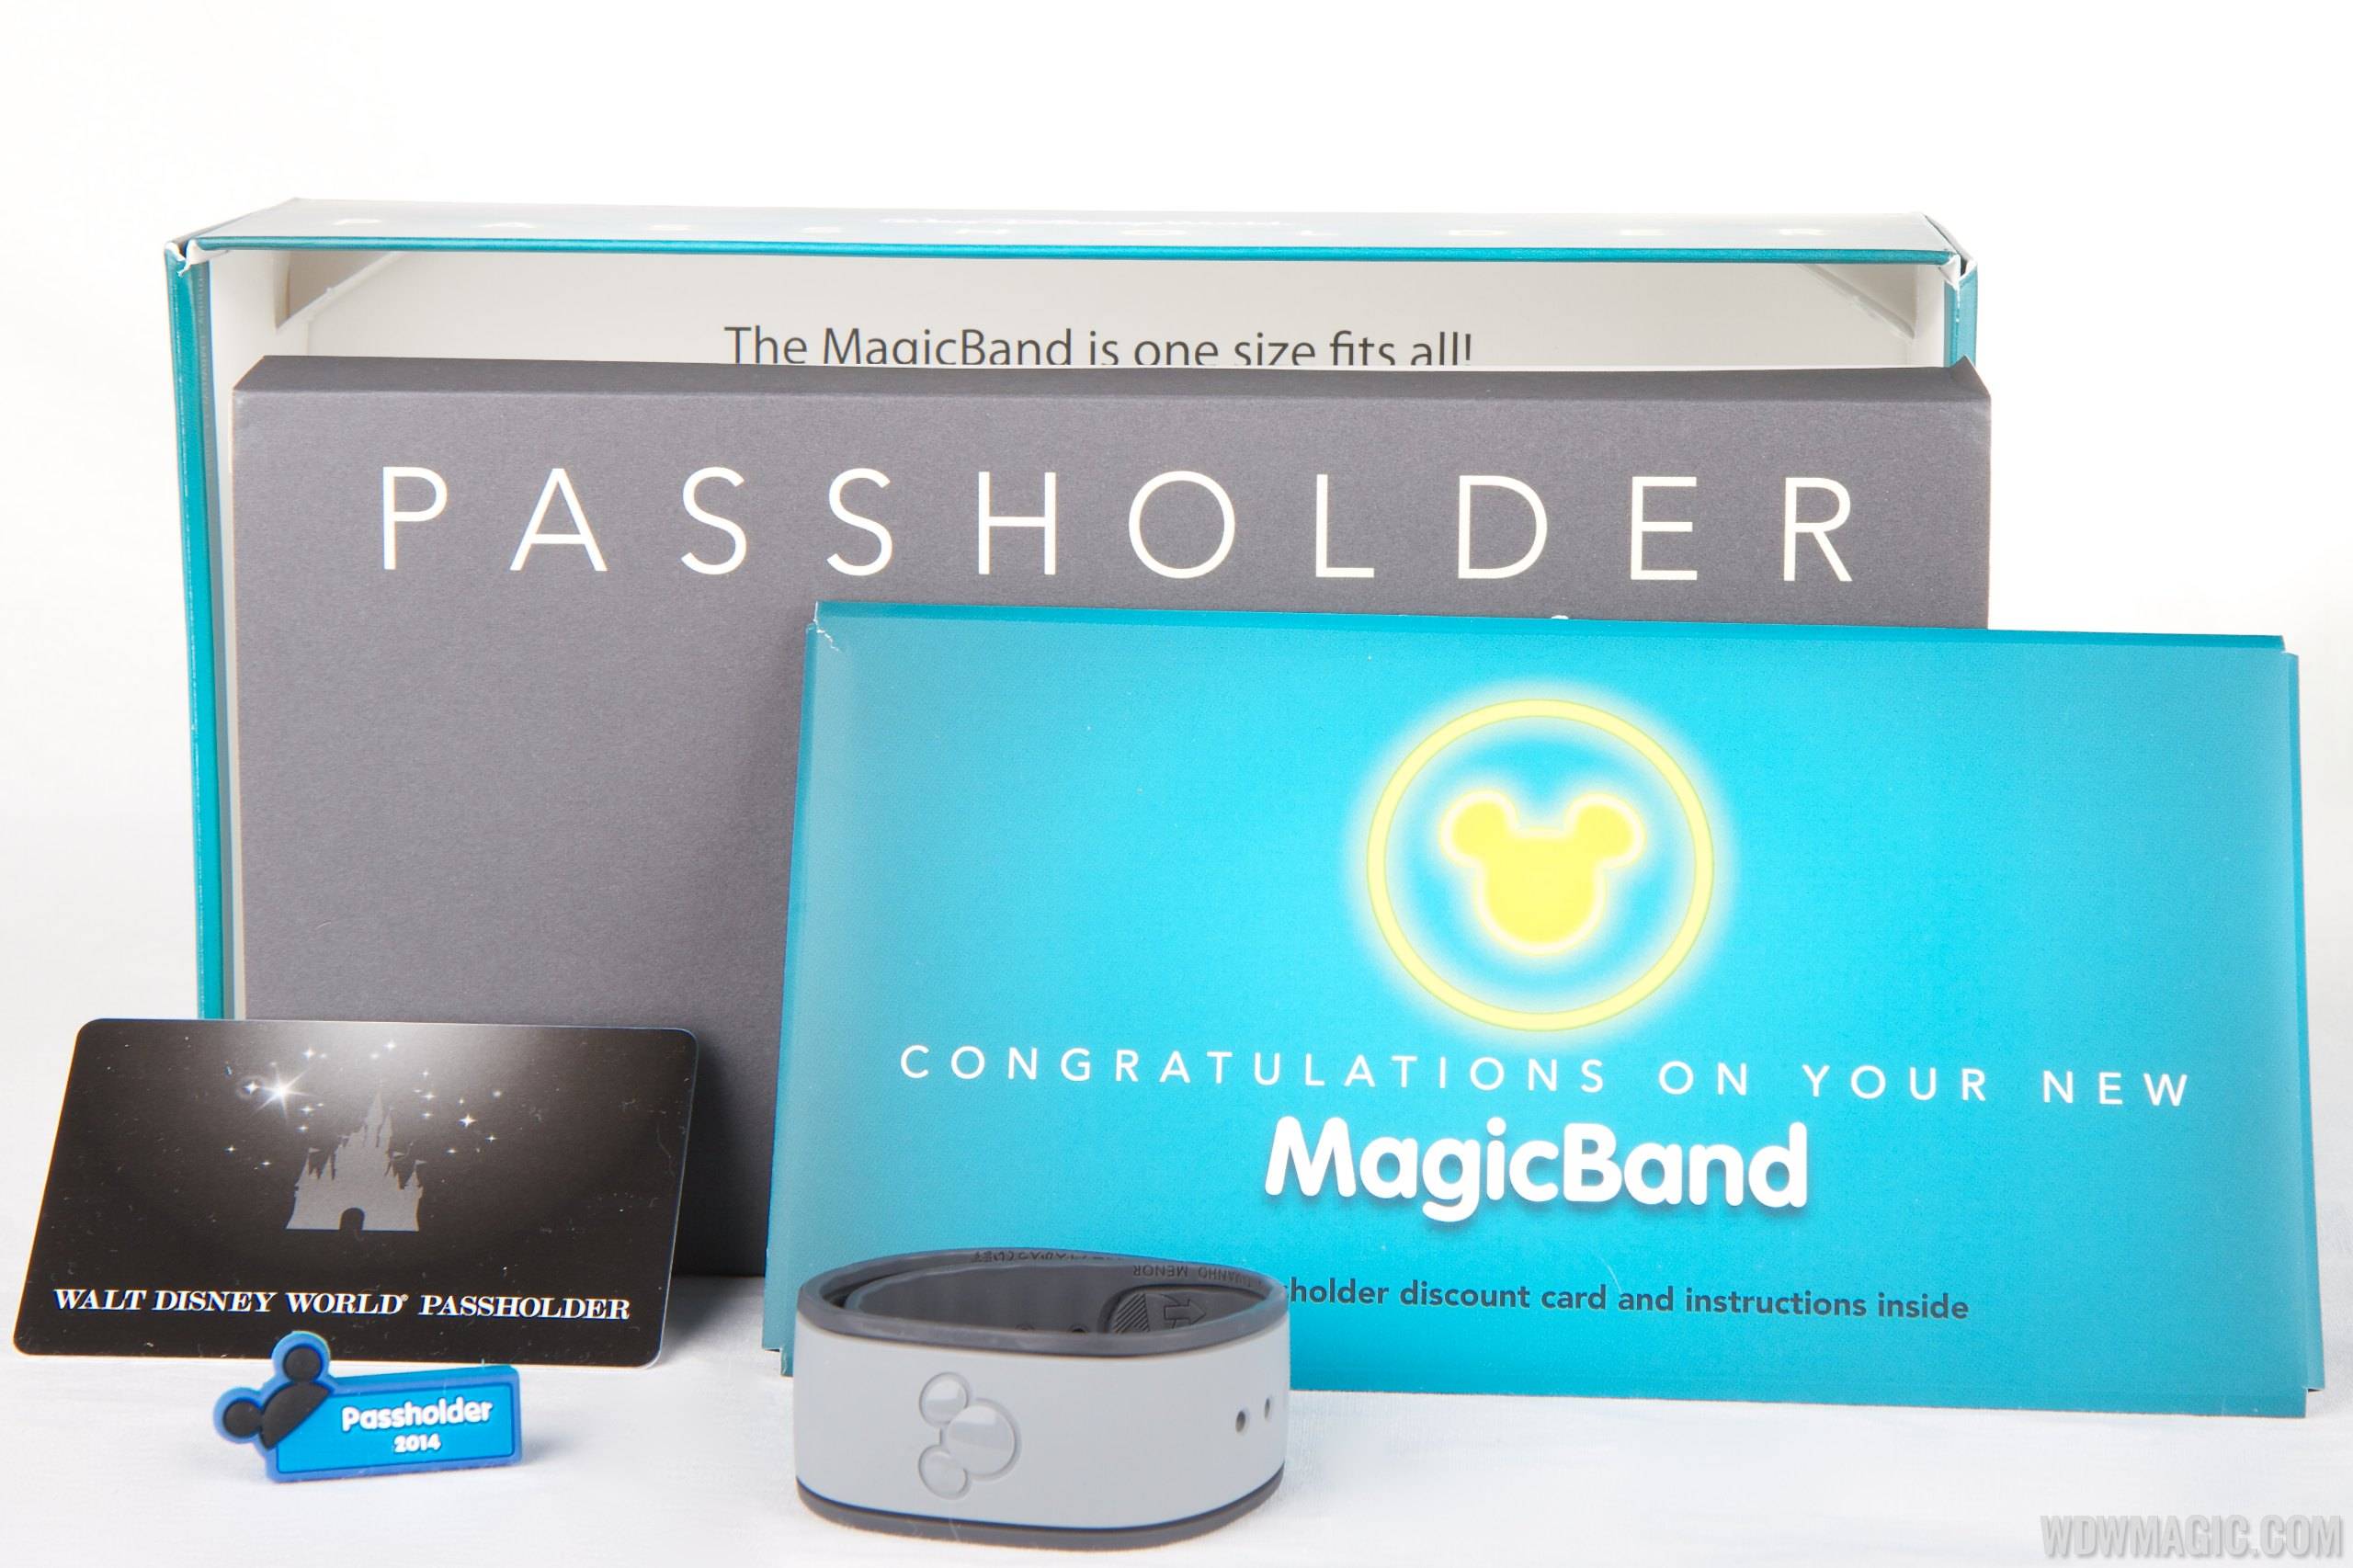 Passholder MagicBand with MagicSlider, discount card and instructions